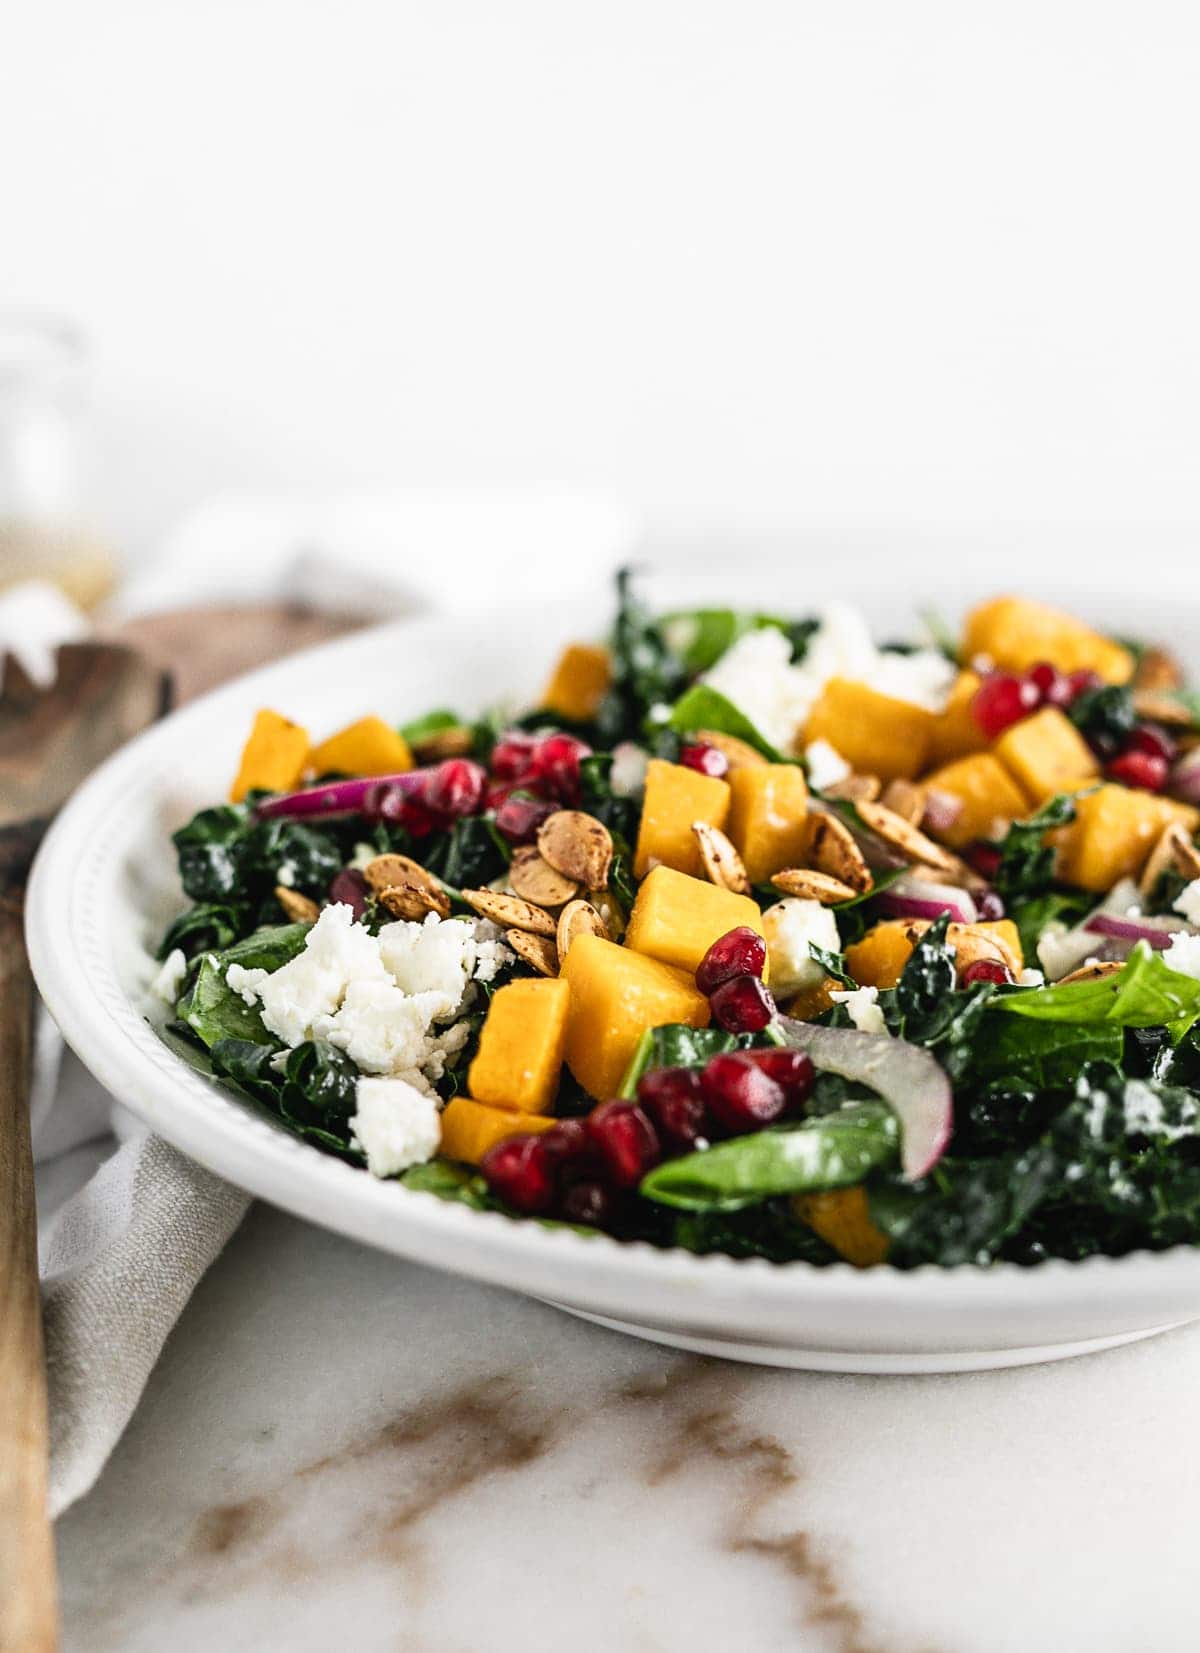 A healthy and delicious fall butternut squash salad that's perfect for something fresh after Thanksgiving! (gluten-free, vegetarian)